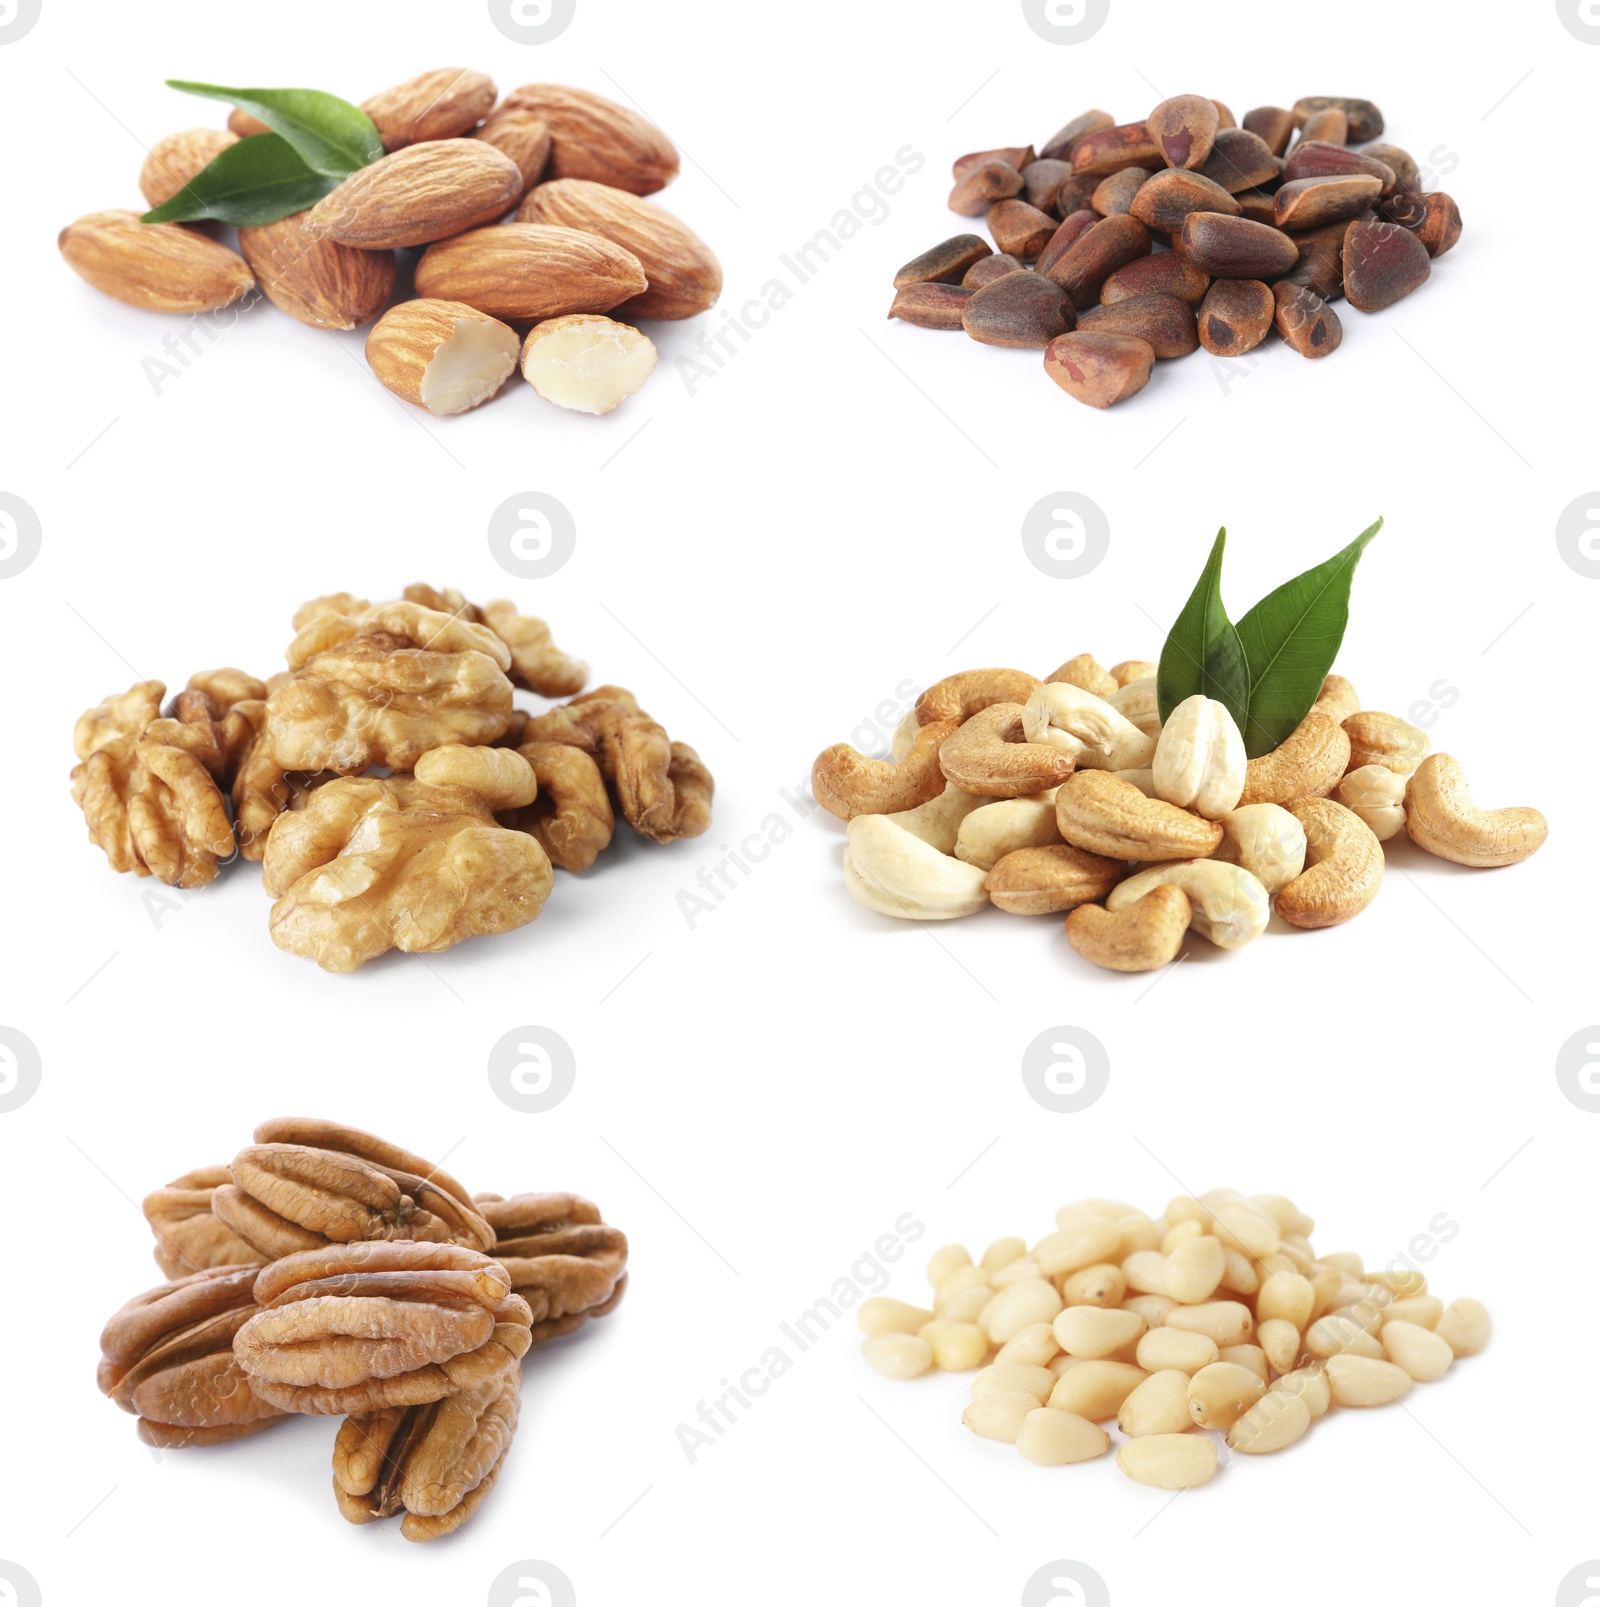 Image of Set of different nuts on white background